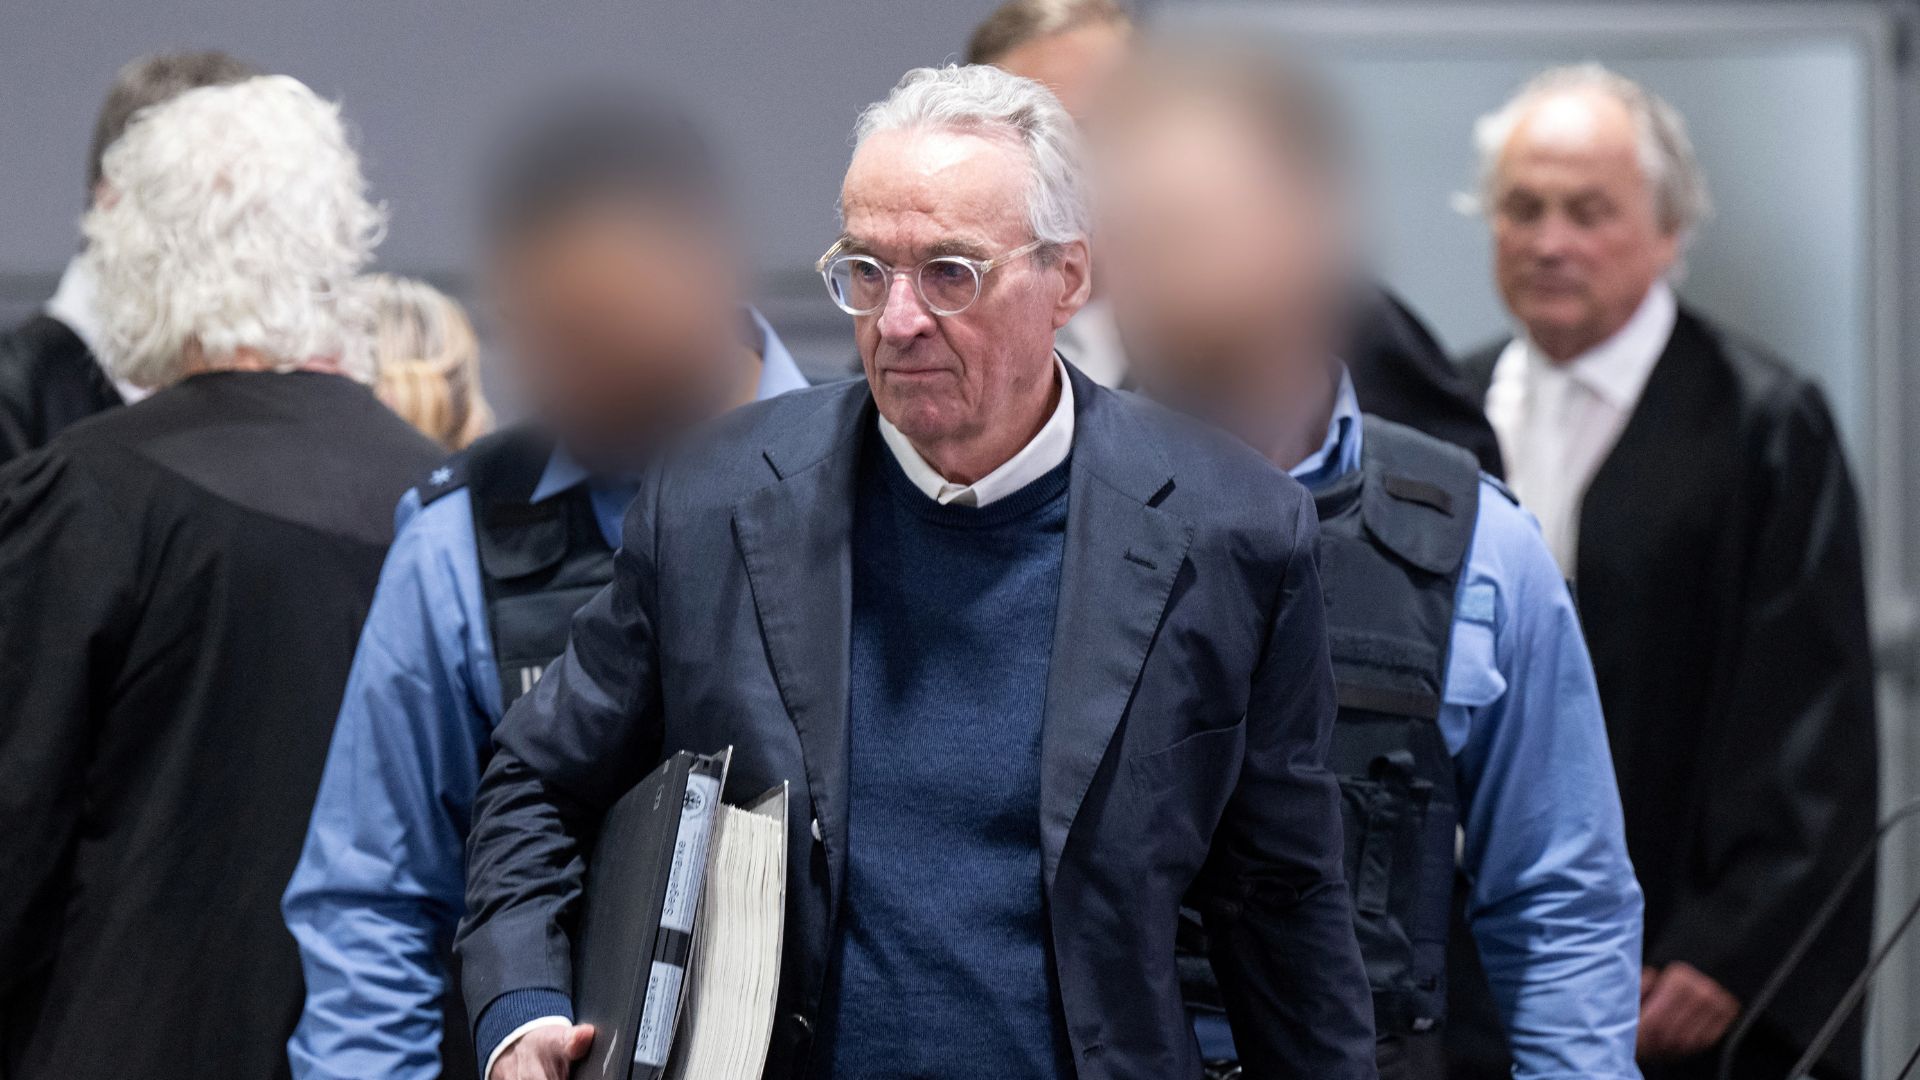 Property investor Heinrich XIII Prinz Reuss and his lawyers arrive for his trial. /Boris Roessler/Pool via Reuters